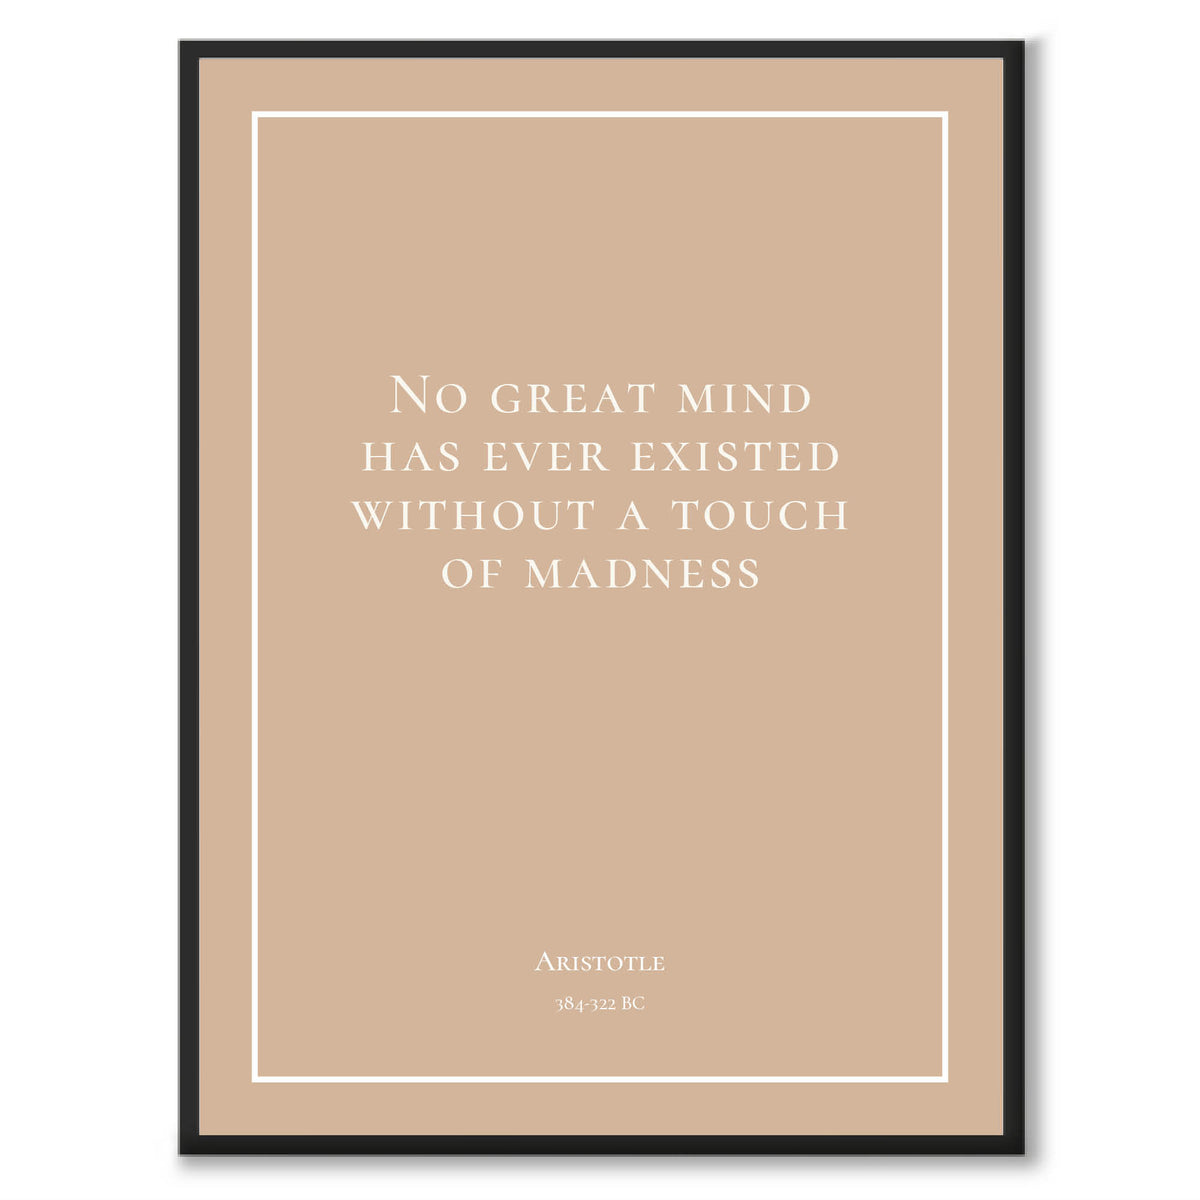 Aristotle - No great mind has ever existed without a touch of madness - Historly AB